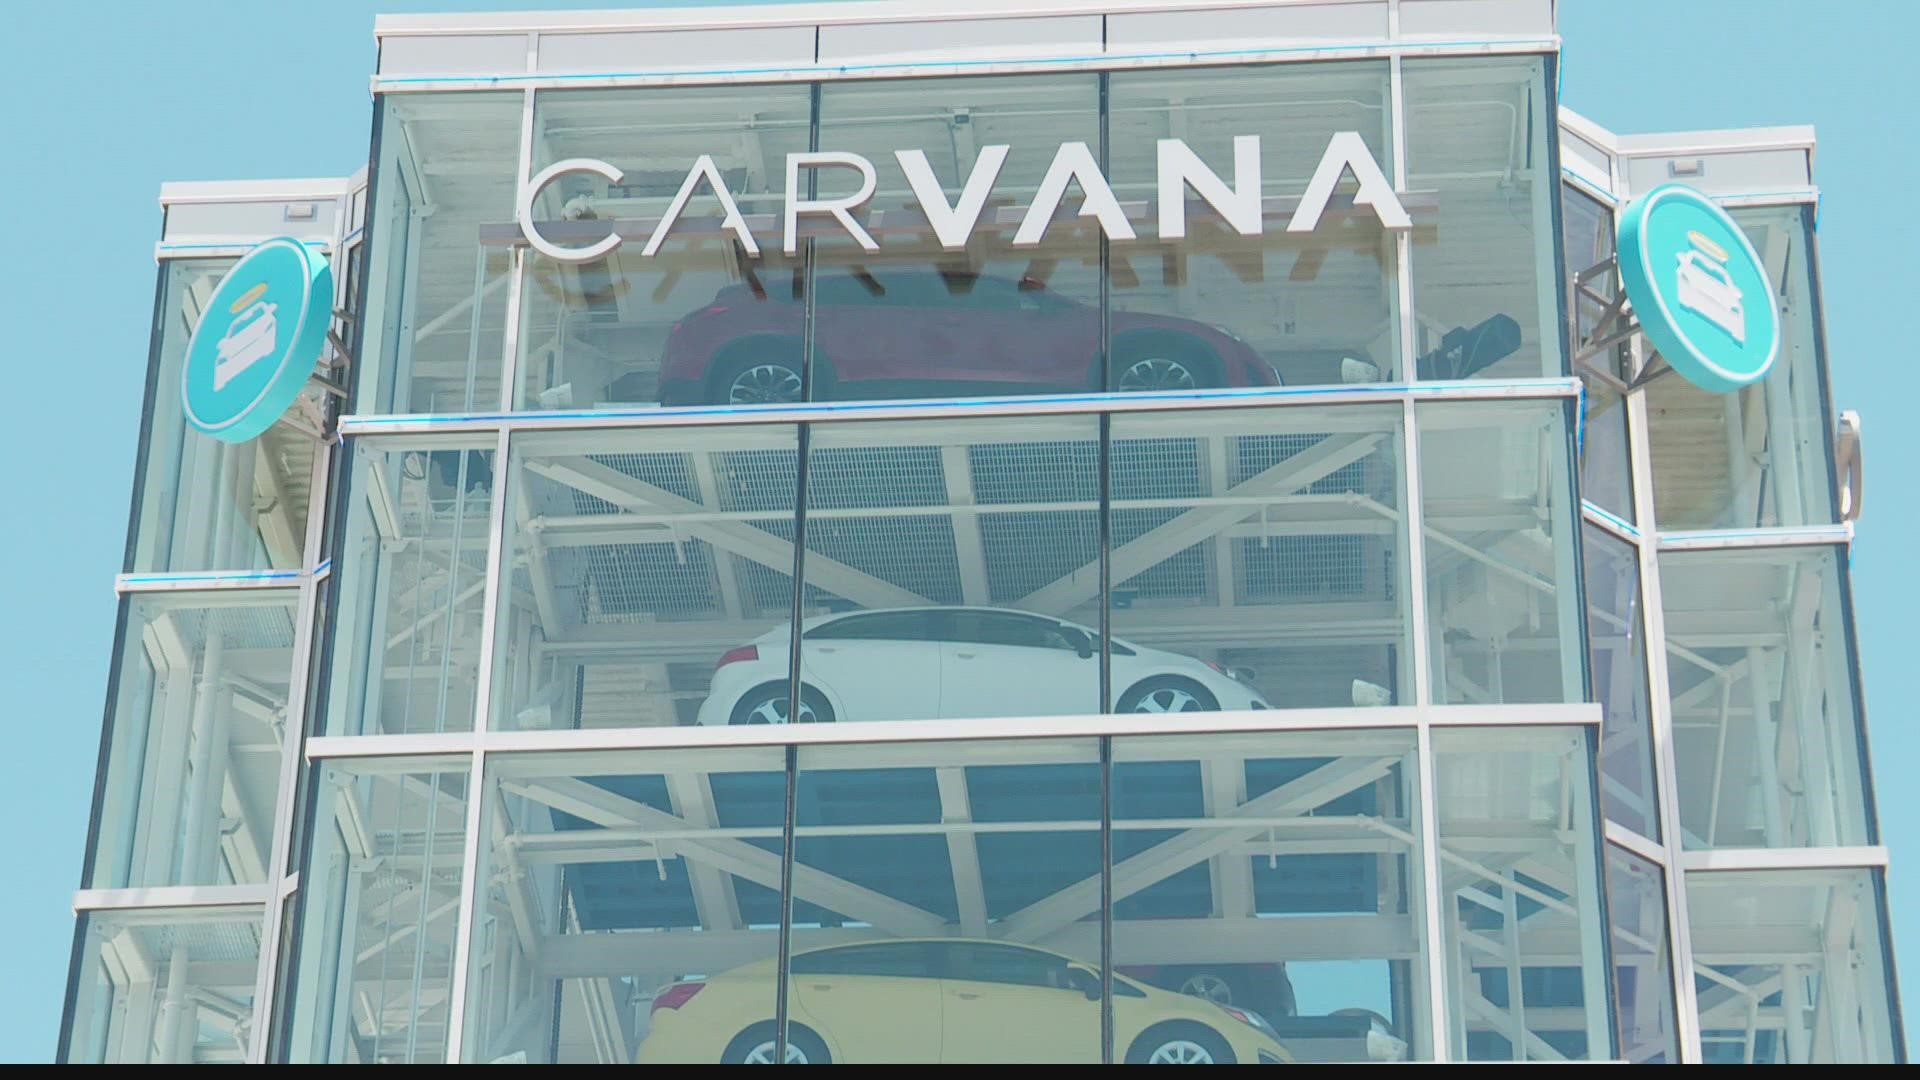 On the same day Carvana announced it is cutting employee rolls, the company also purchased an auto auction business for $2.2 billion.